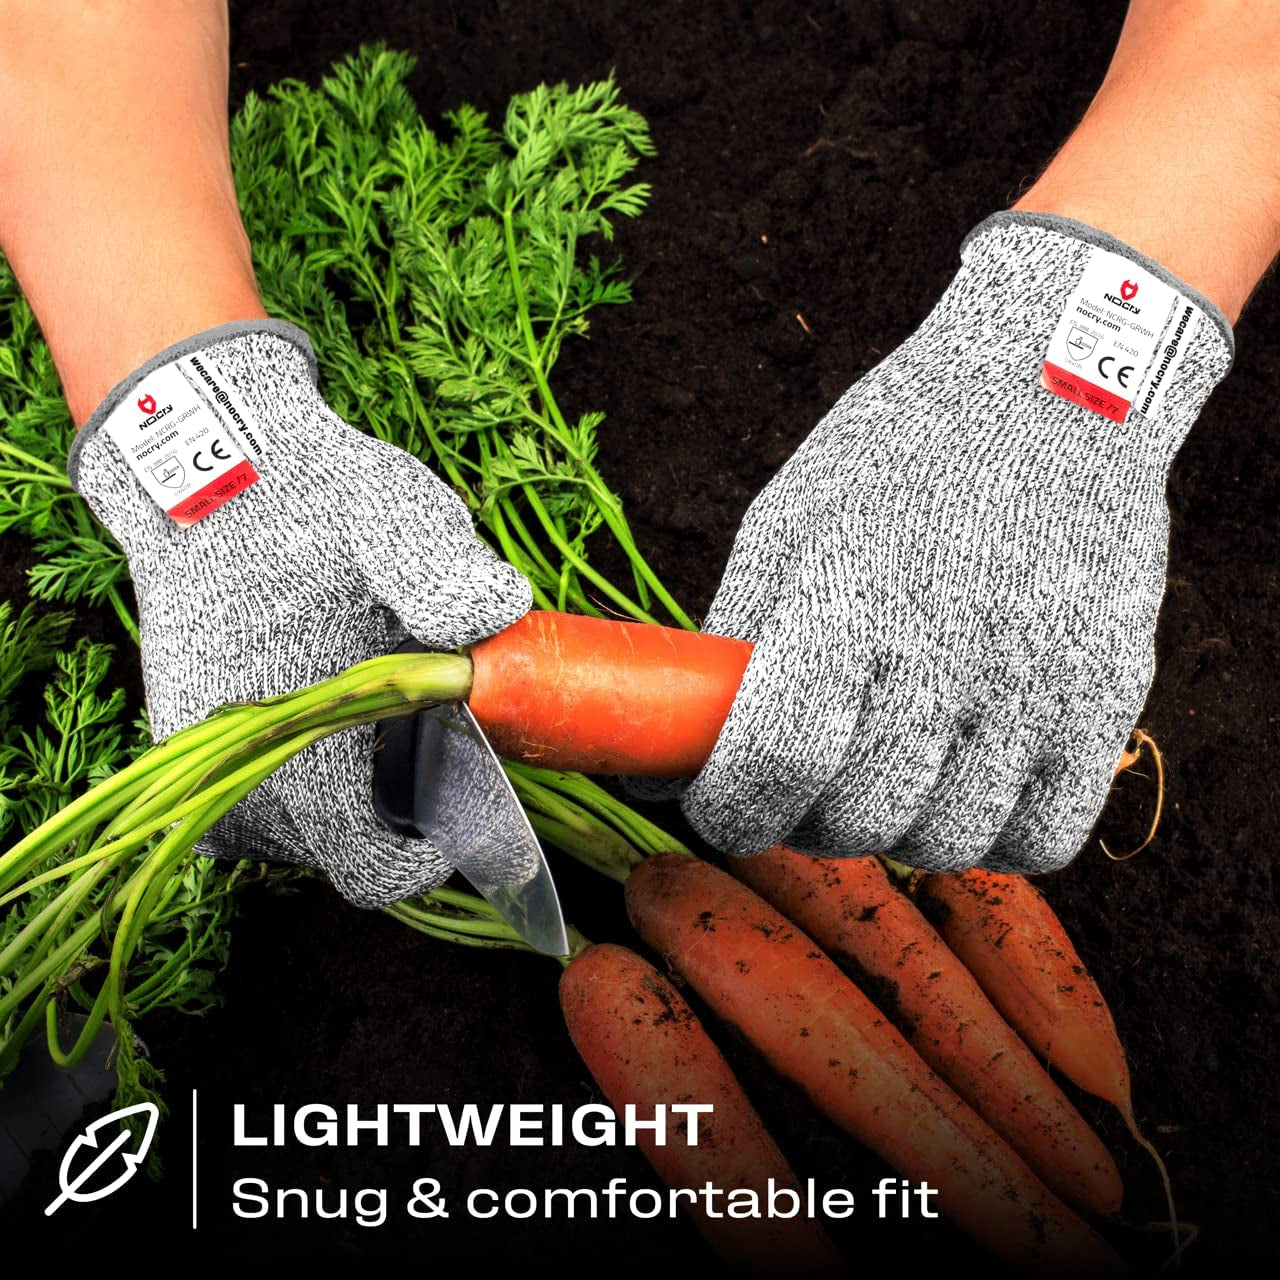 Premium Cut Resistant Gloves Food Grade — Level 5 Protection; Ambidextrous; Machine Washable; Superior Comfort and Dexterity; Lightweight Protective Gloves; Complimentary Ebook